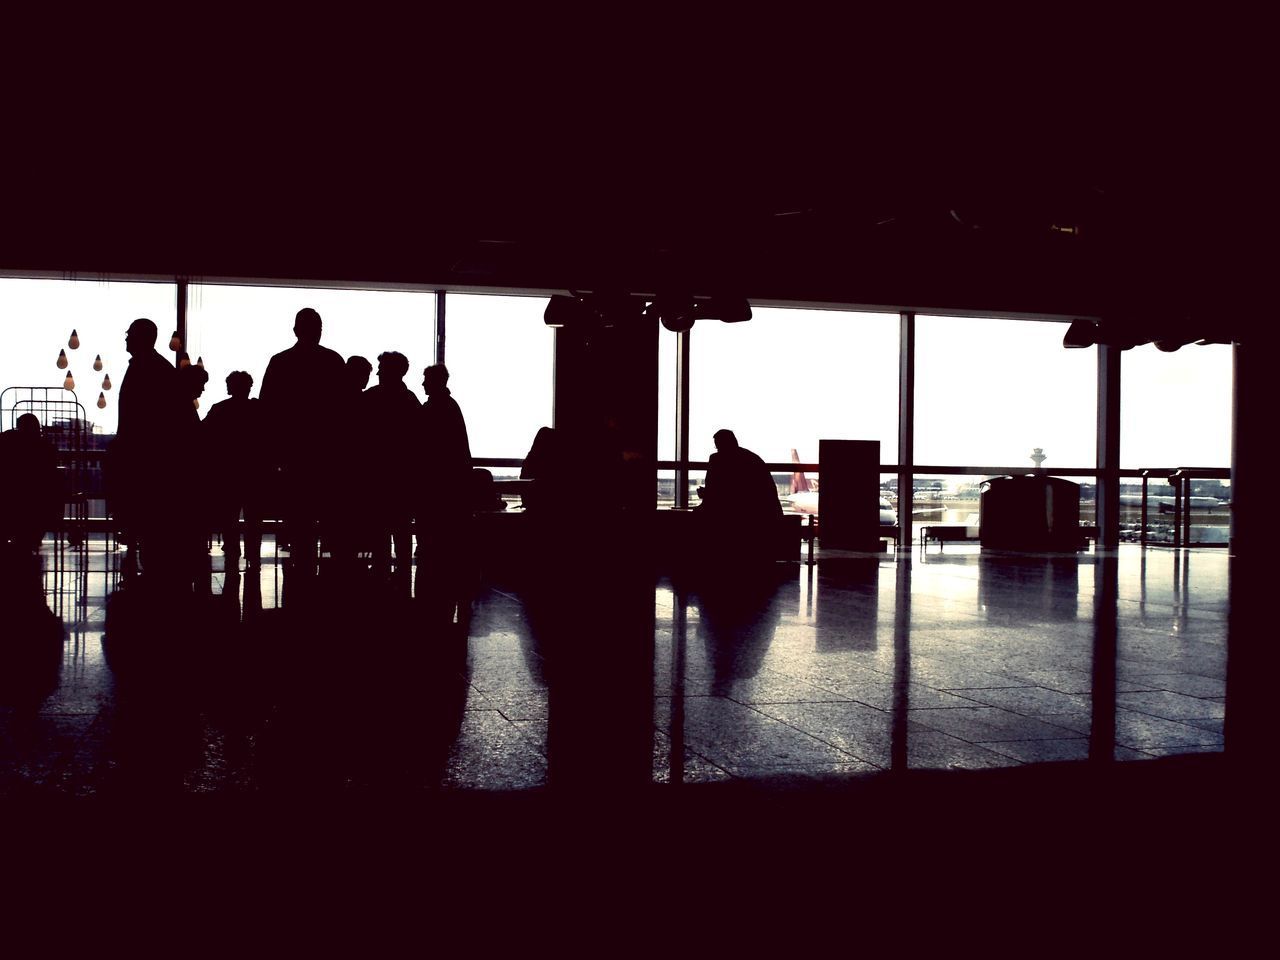 SILHOUETTE PEOPLE IN AIRPORT LOBBY